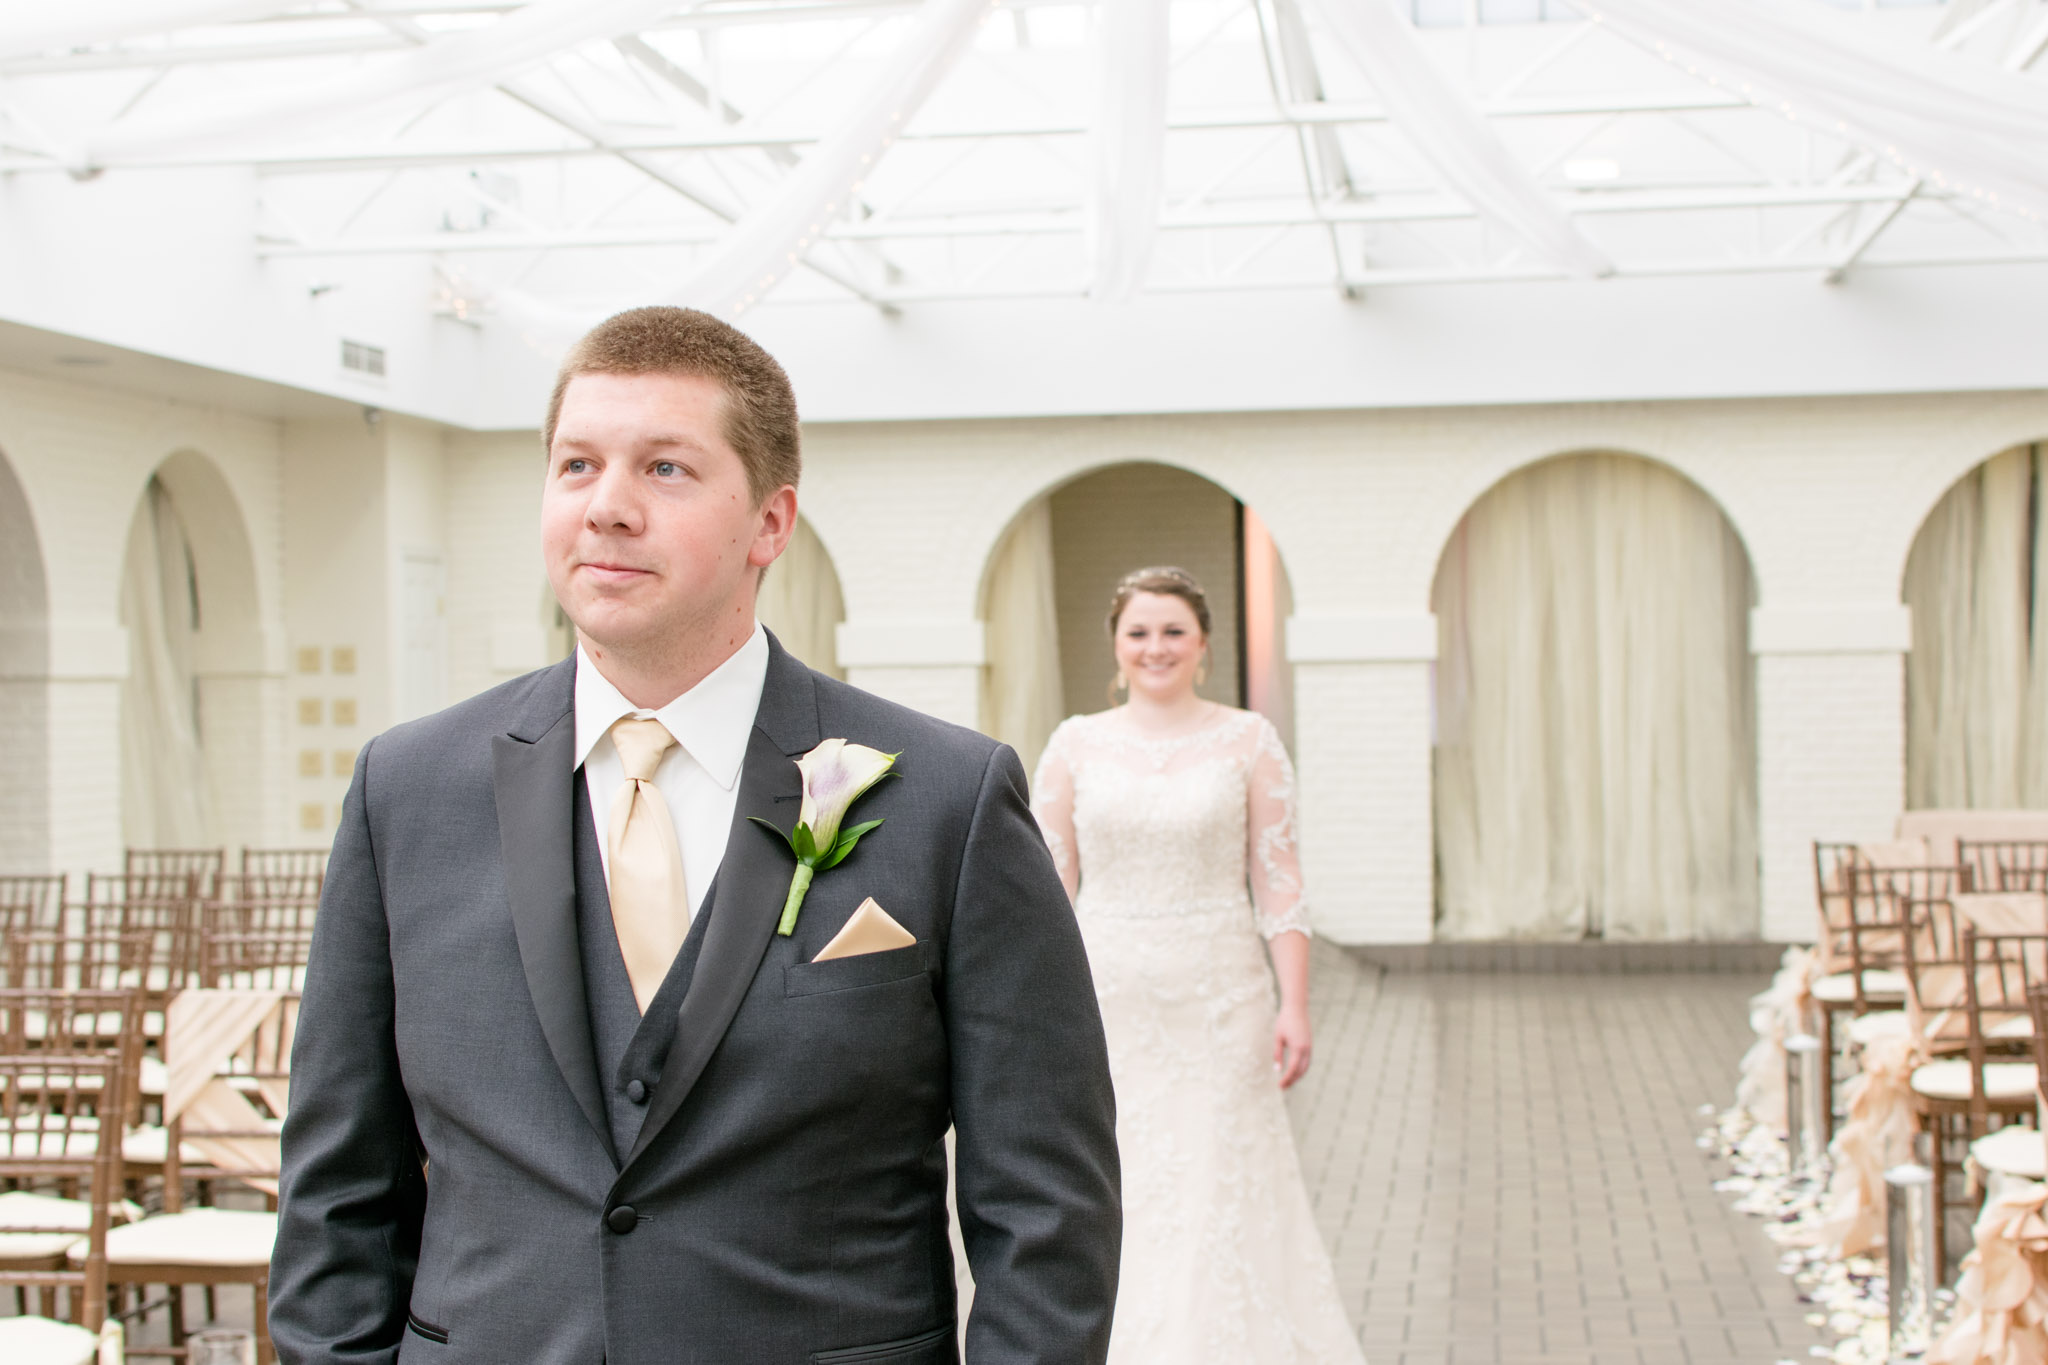 Groom waits to see bride during first look